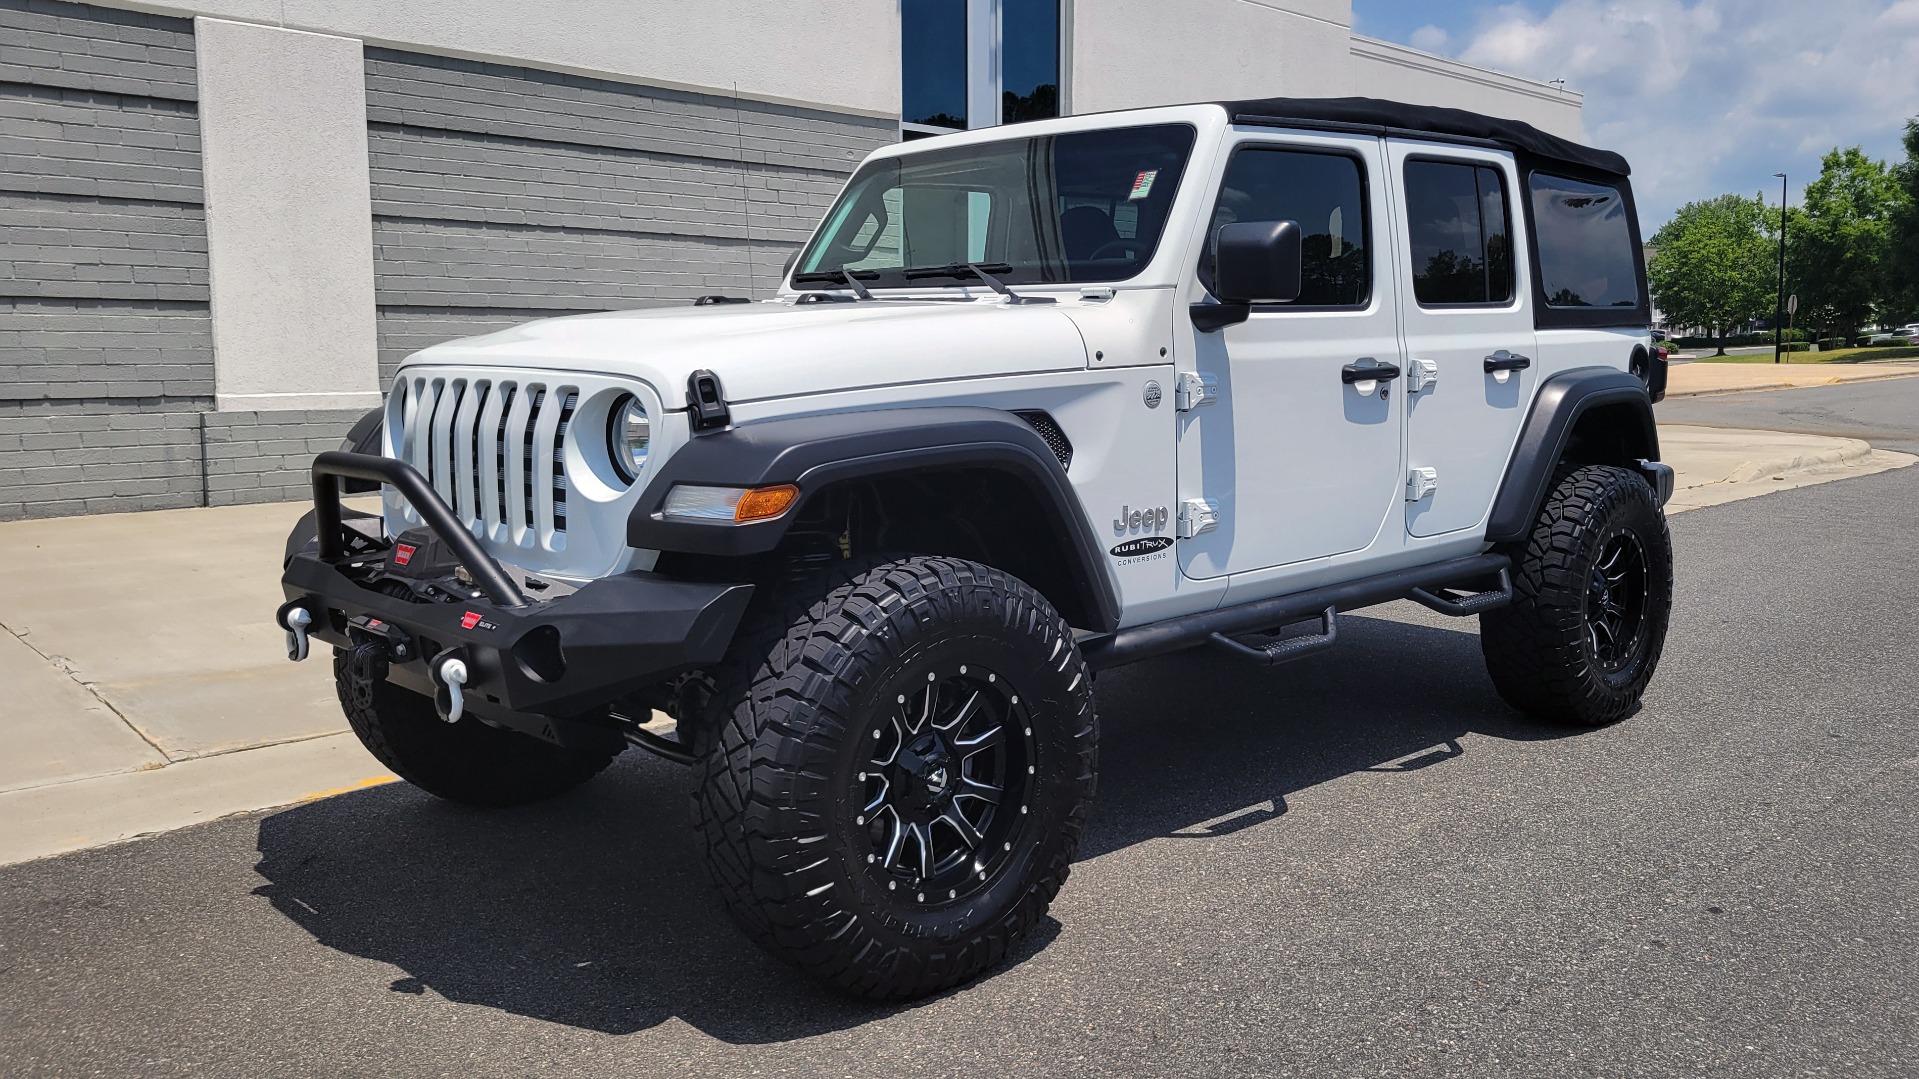 Used 2018 Jeep WRANGLER UNLIMITED SPORT RUBITRUX 4X4 / AUTO / CLOTH SEATS / SOFT-TOP / CAMERA for sale $46,500 at Formula Imports in Charlotte NC 28227 3